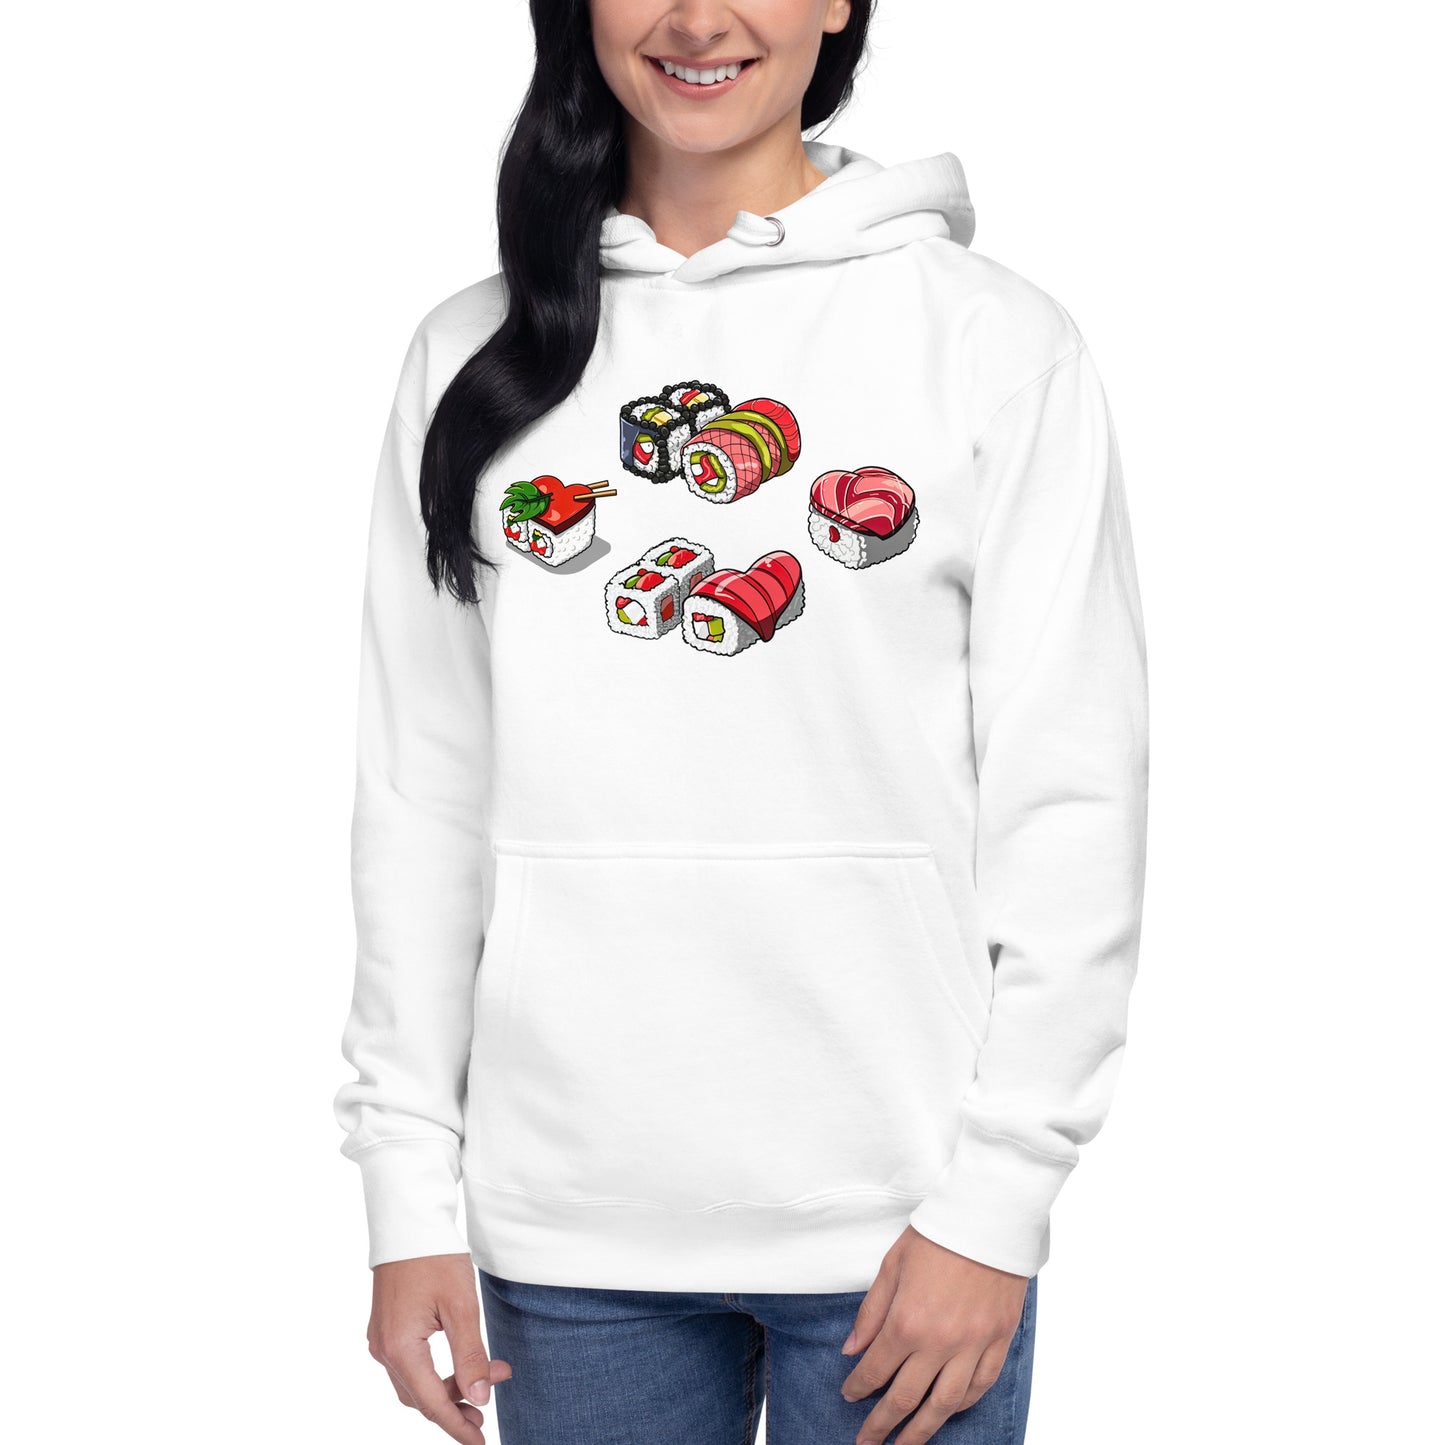 Sushi Lovers Hoodie, Men and Women gifts for loved ones, loved sushi lovers, sushi hoodies, hoodies for sushi lovers, unisex hoodies for loved ones, valentines gift, love gift, cool sushi designs by knqv, Unisex Hoodie